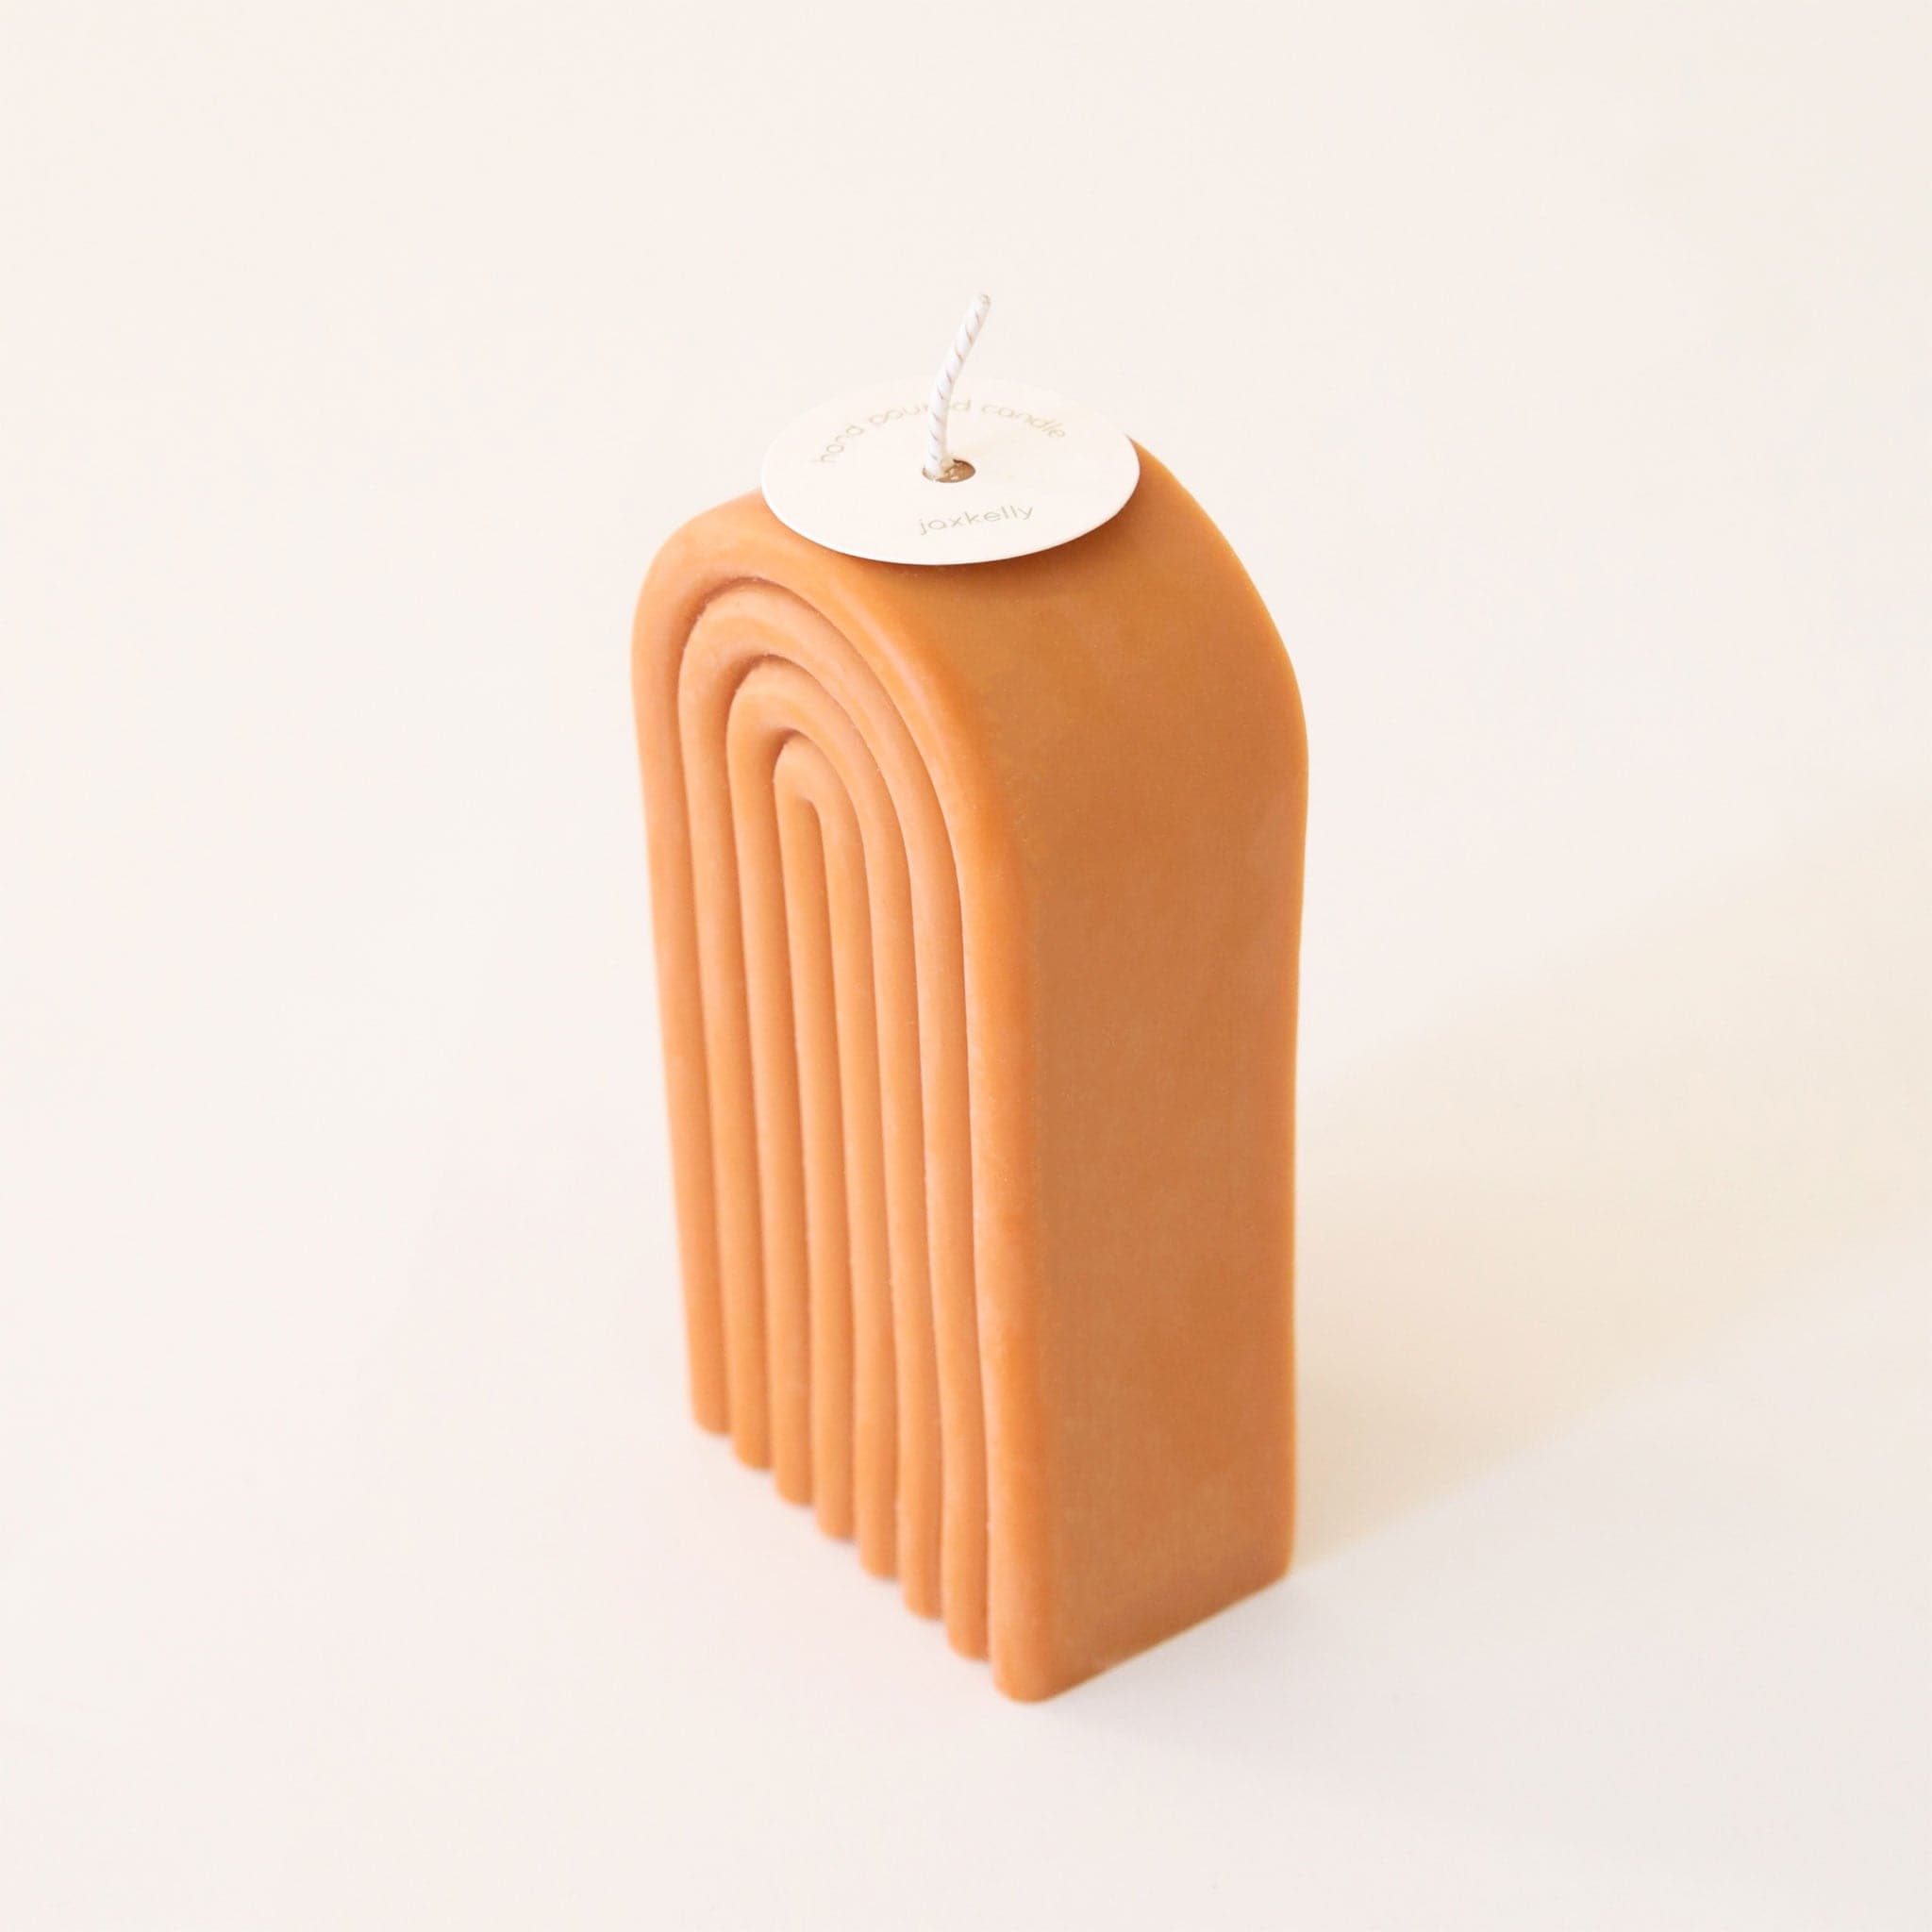 Side angle of single tall, arch shaped candle. The side of the candle is smooth and curved.